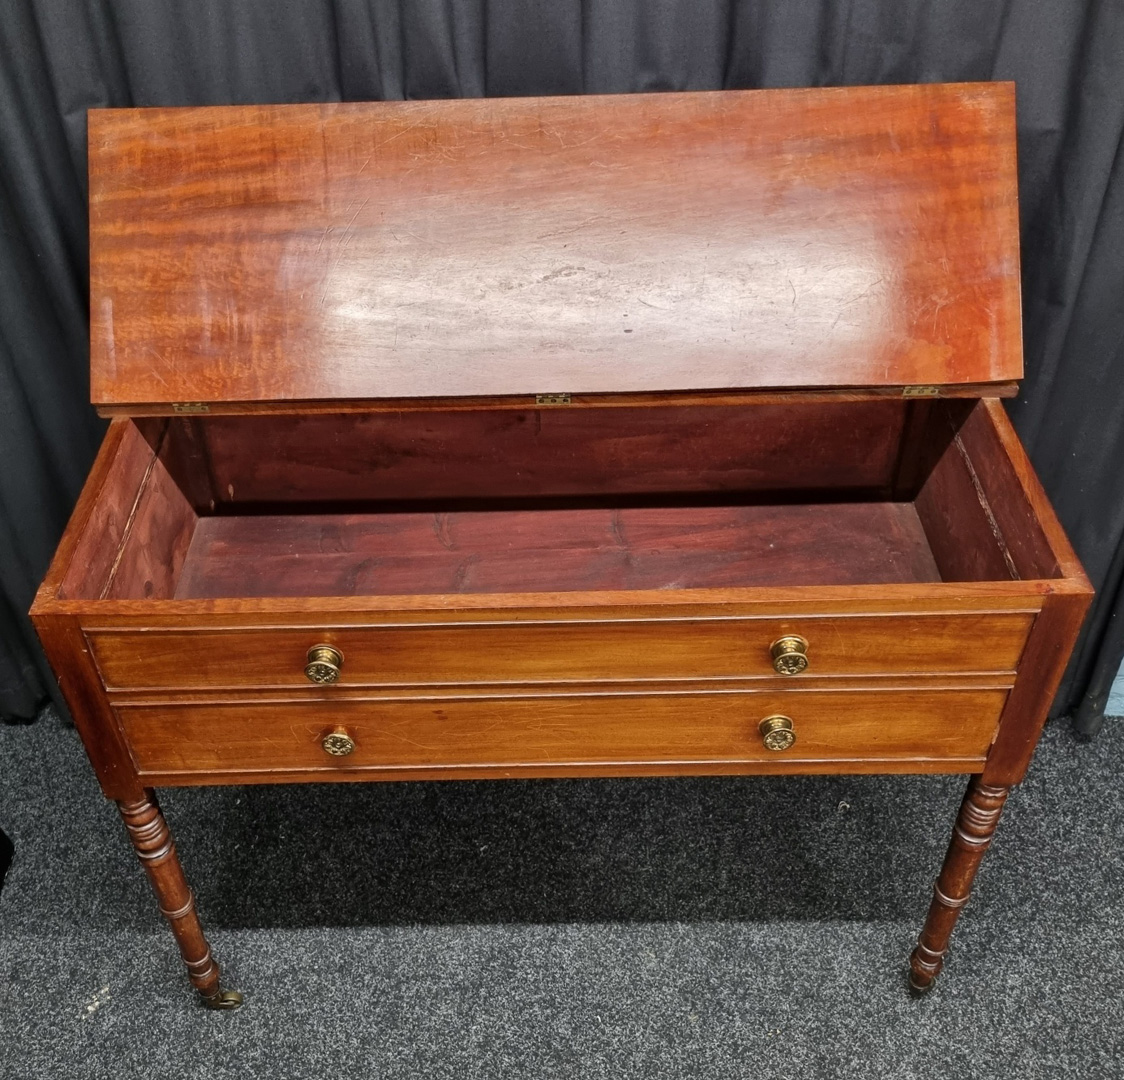 An 1840 mahogany piano forte converted to side table, with lifting lid and faux drawers with brass - Image 3 of 3